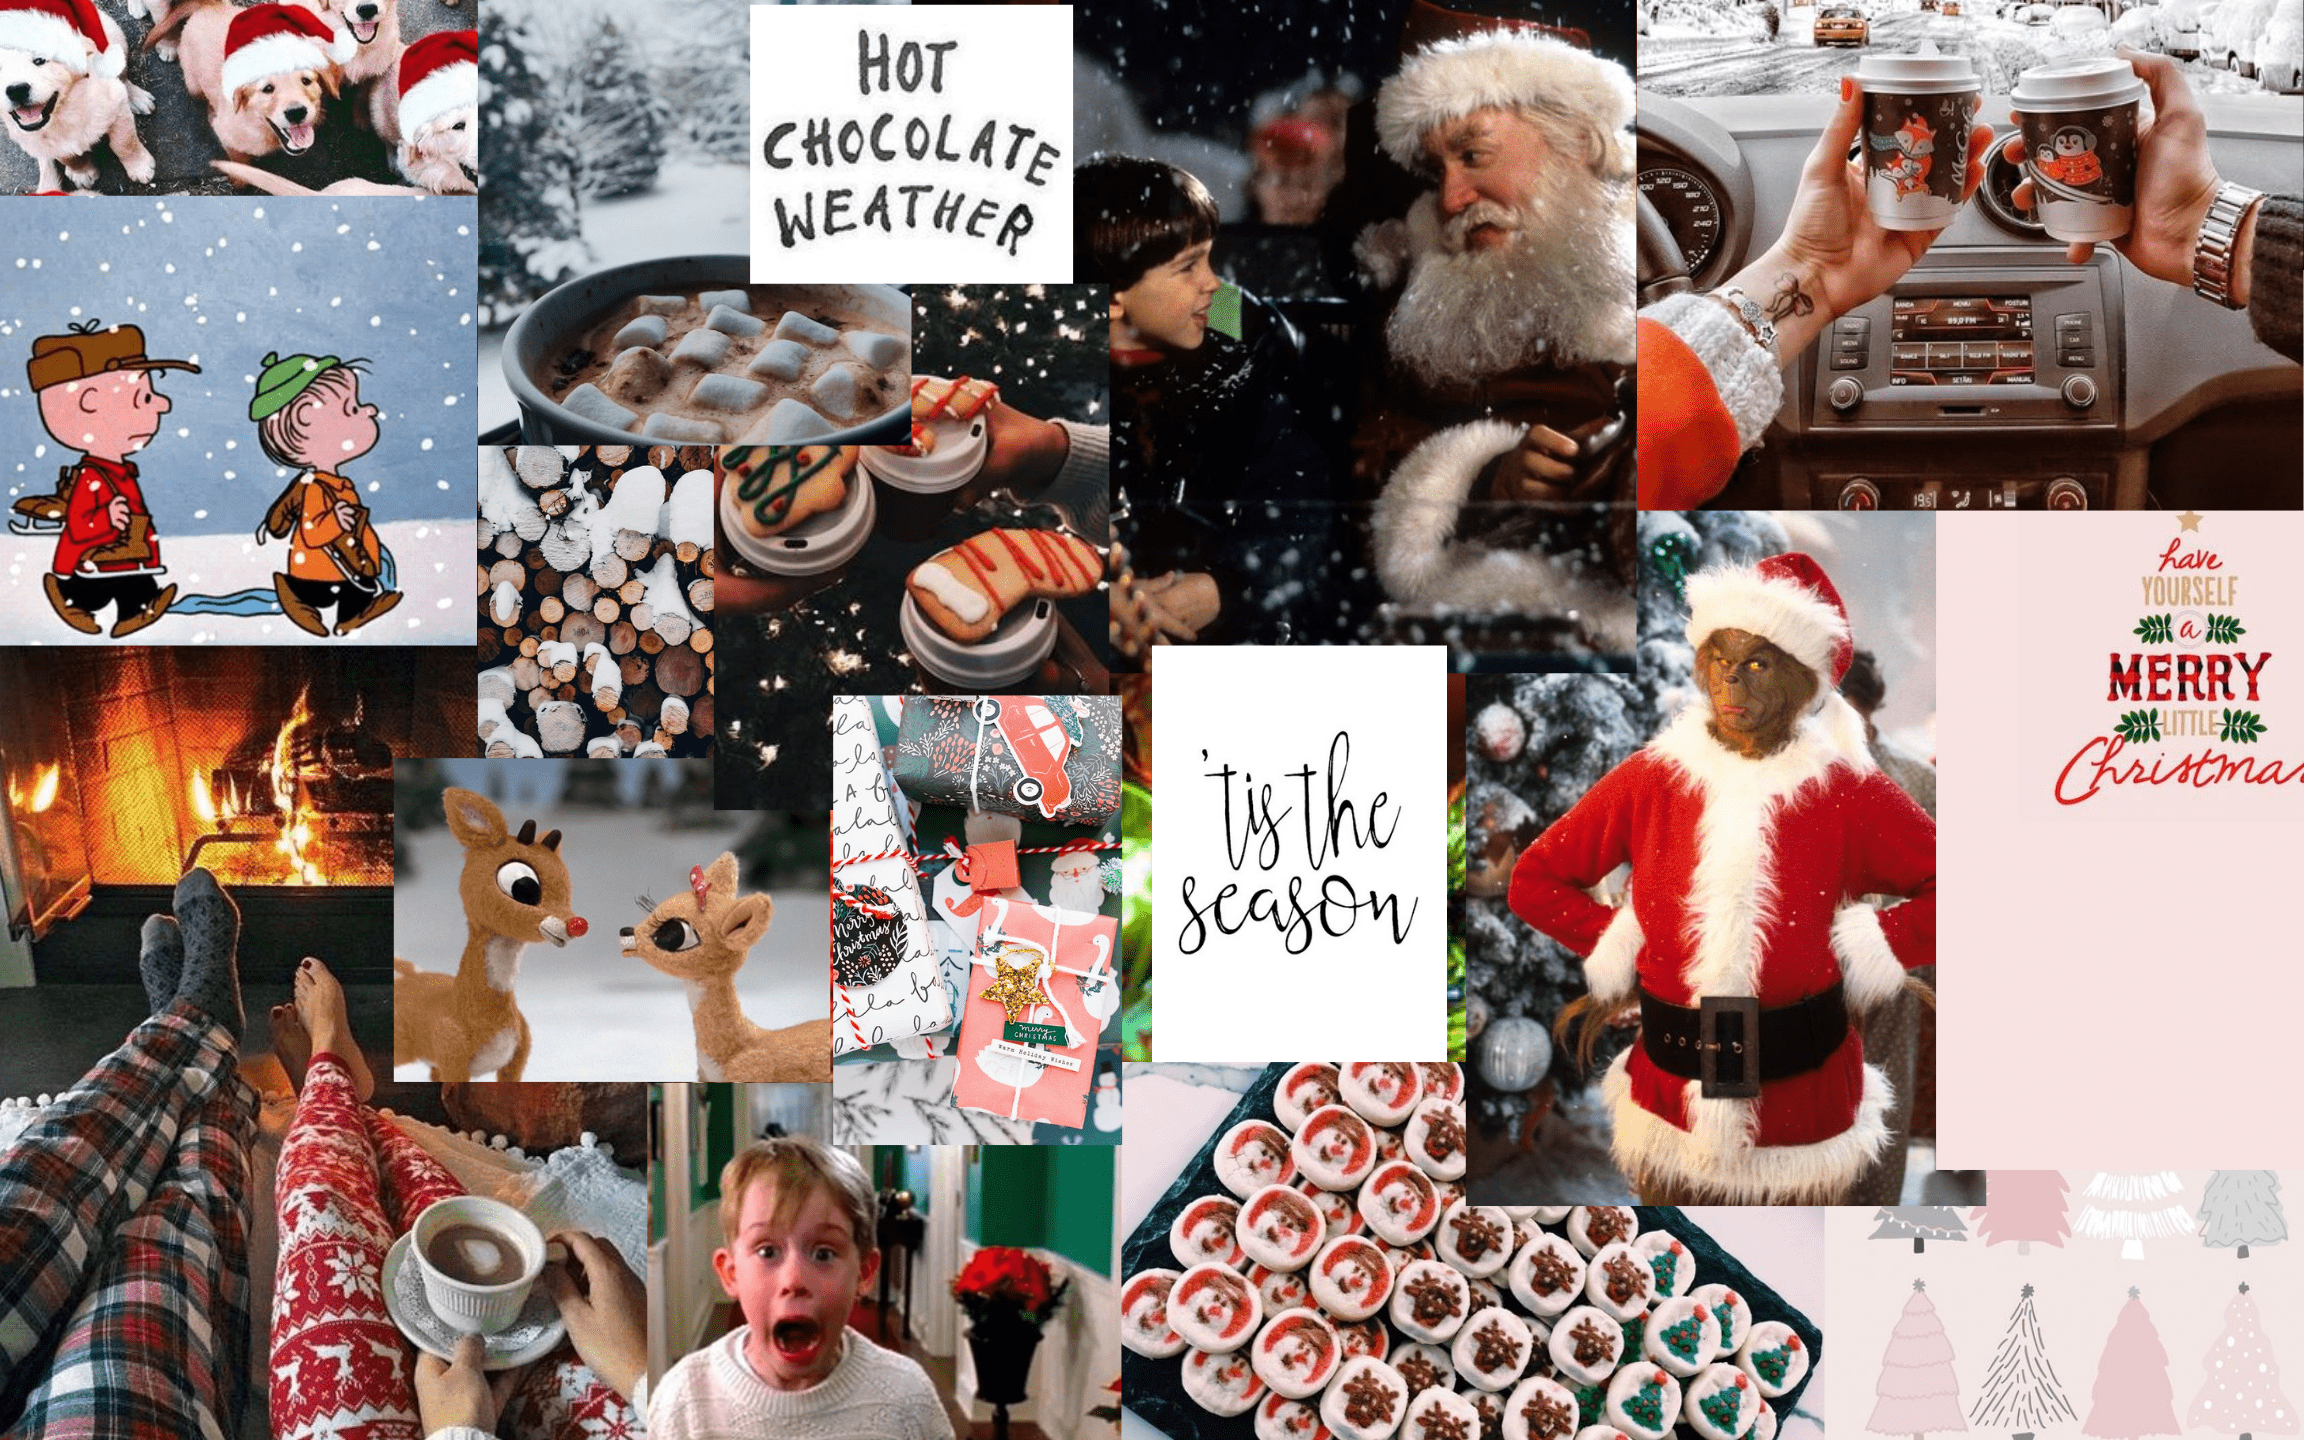 A collage of Christmas images including hot chocolate, movies, and decorations. - Christmas